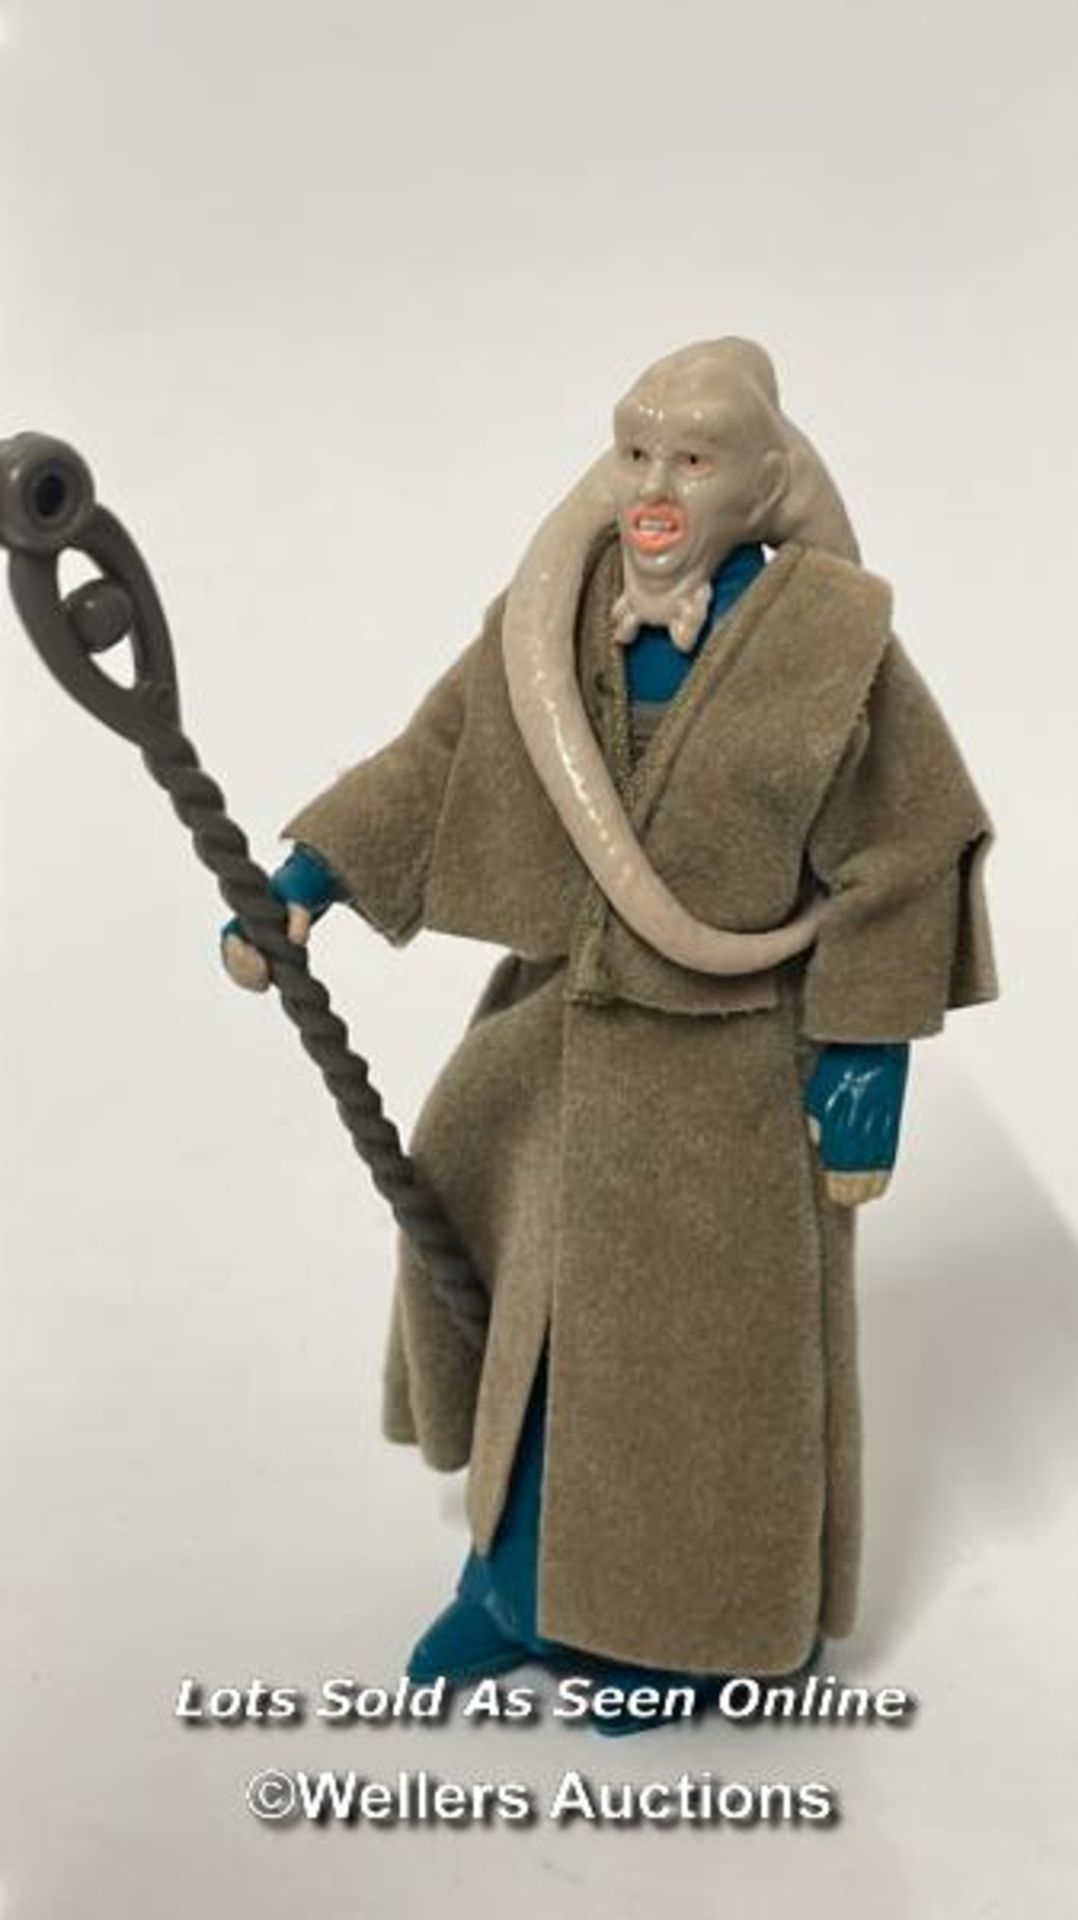 Vintage Star Wars Return of the Jedi lot including Princess Leia - Boushh, LFL 1983 (NO COO) with - Image 10 of 15